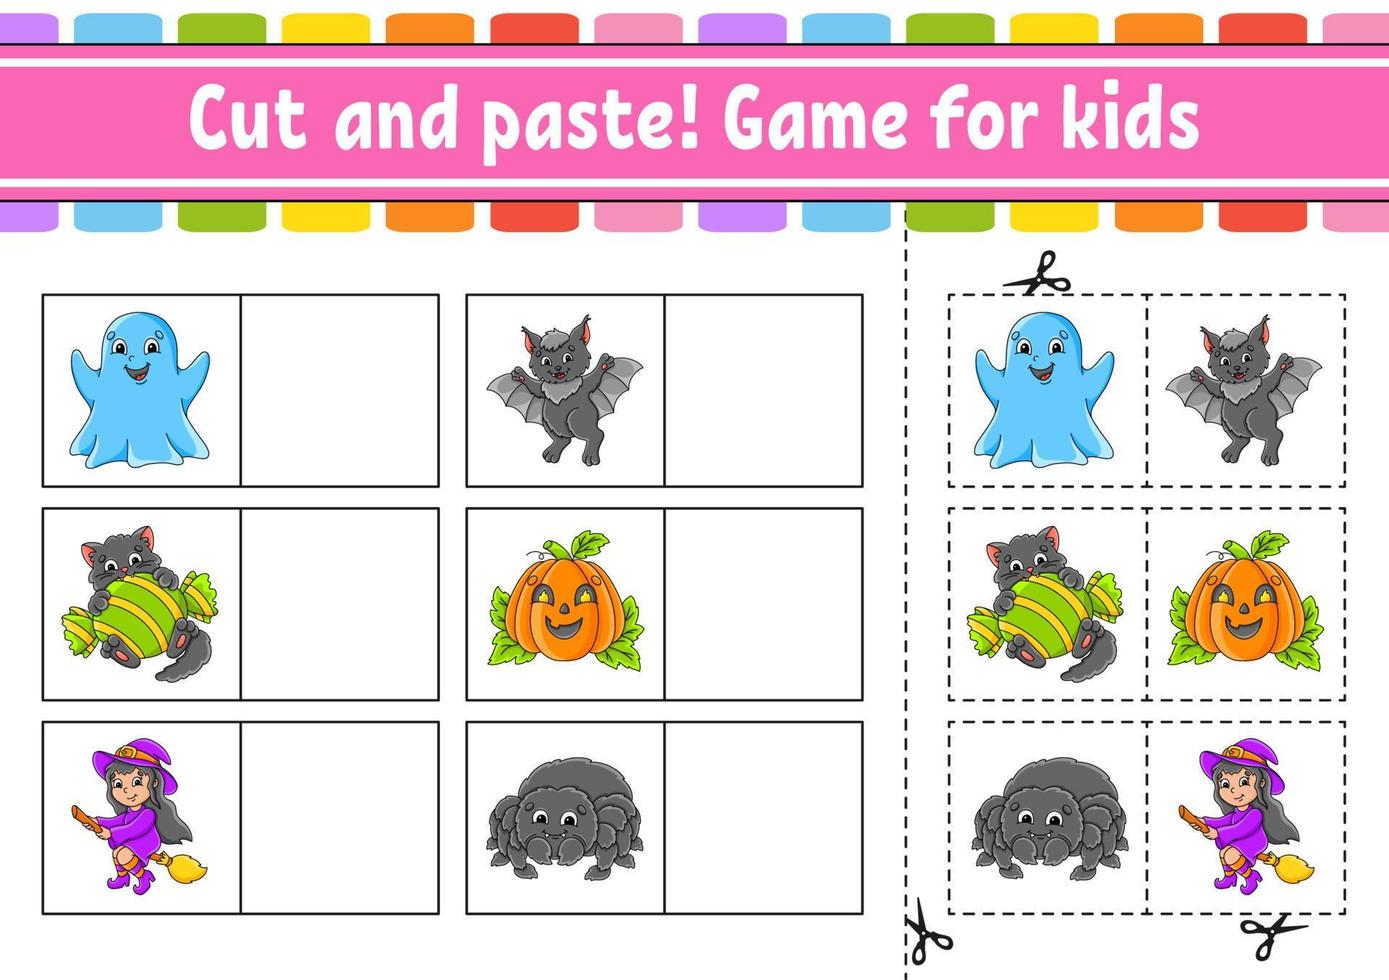 Cut and paste. Game for kids. Educational activity worksheet for kids and toddlers. Game for children. Vector illustration.